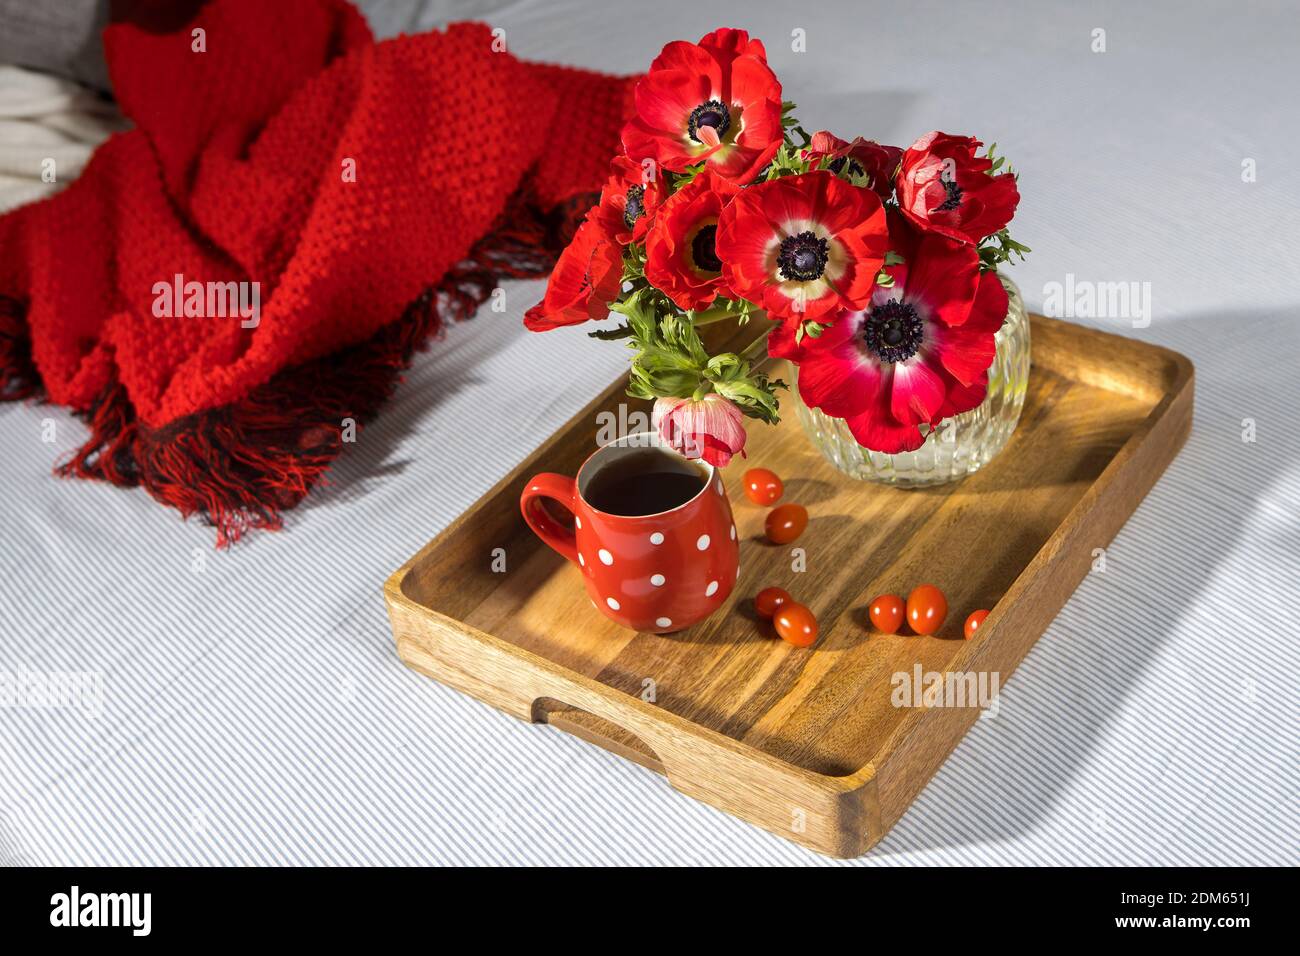 A bouquet of red anemones in a glass vase on a wooden tray on the bed. White polka dot cup with tea. Woolen plaid on a gray sheet/ Morning Stock Photo